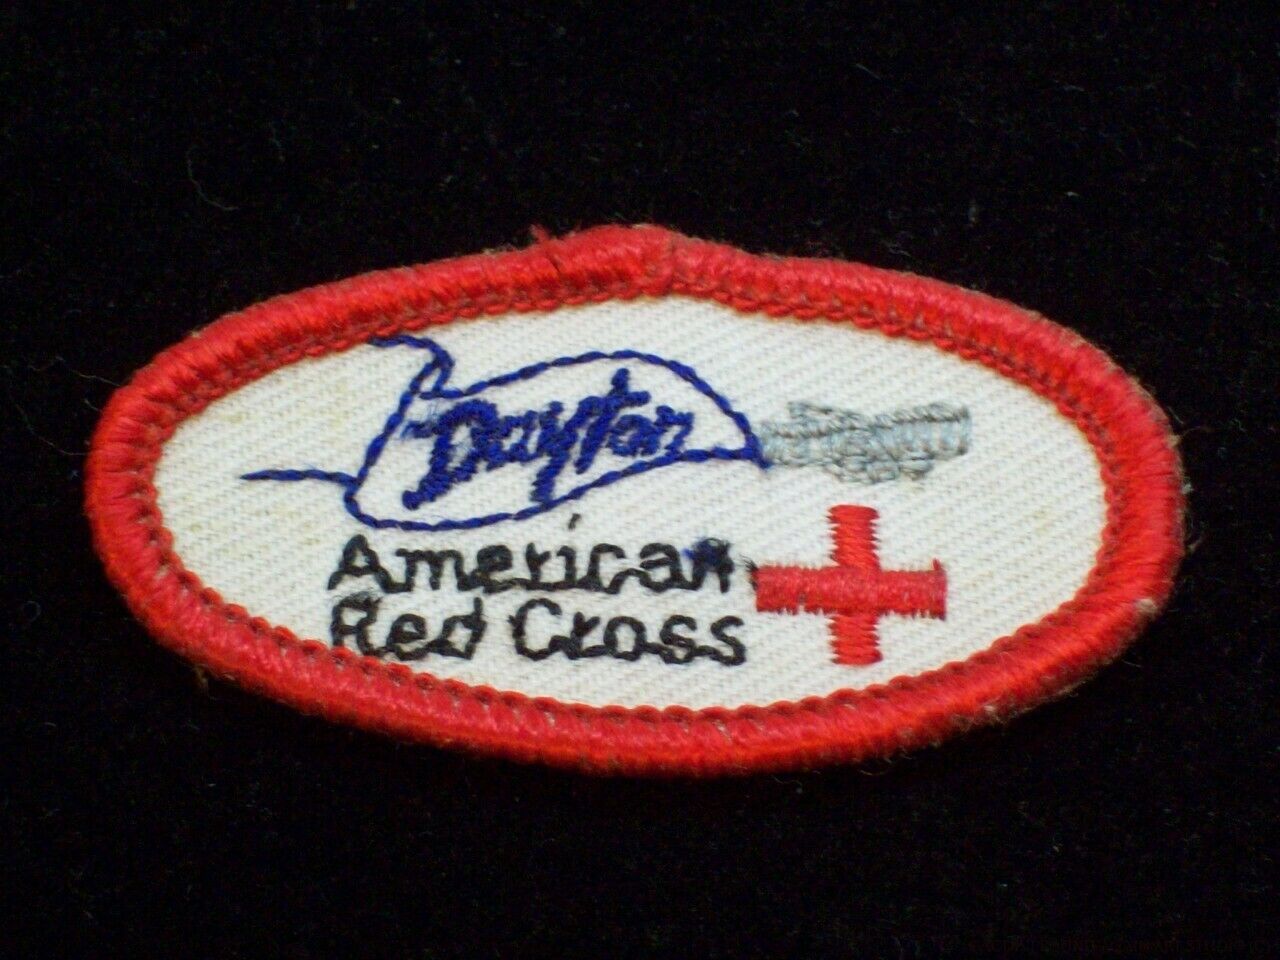 American Red Cross Dayton Ohio Patch Vintage ARC Small Oval Embroidered Badge OH